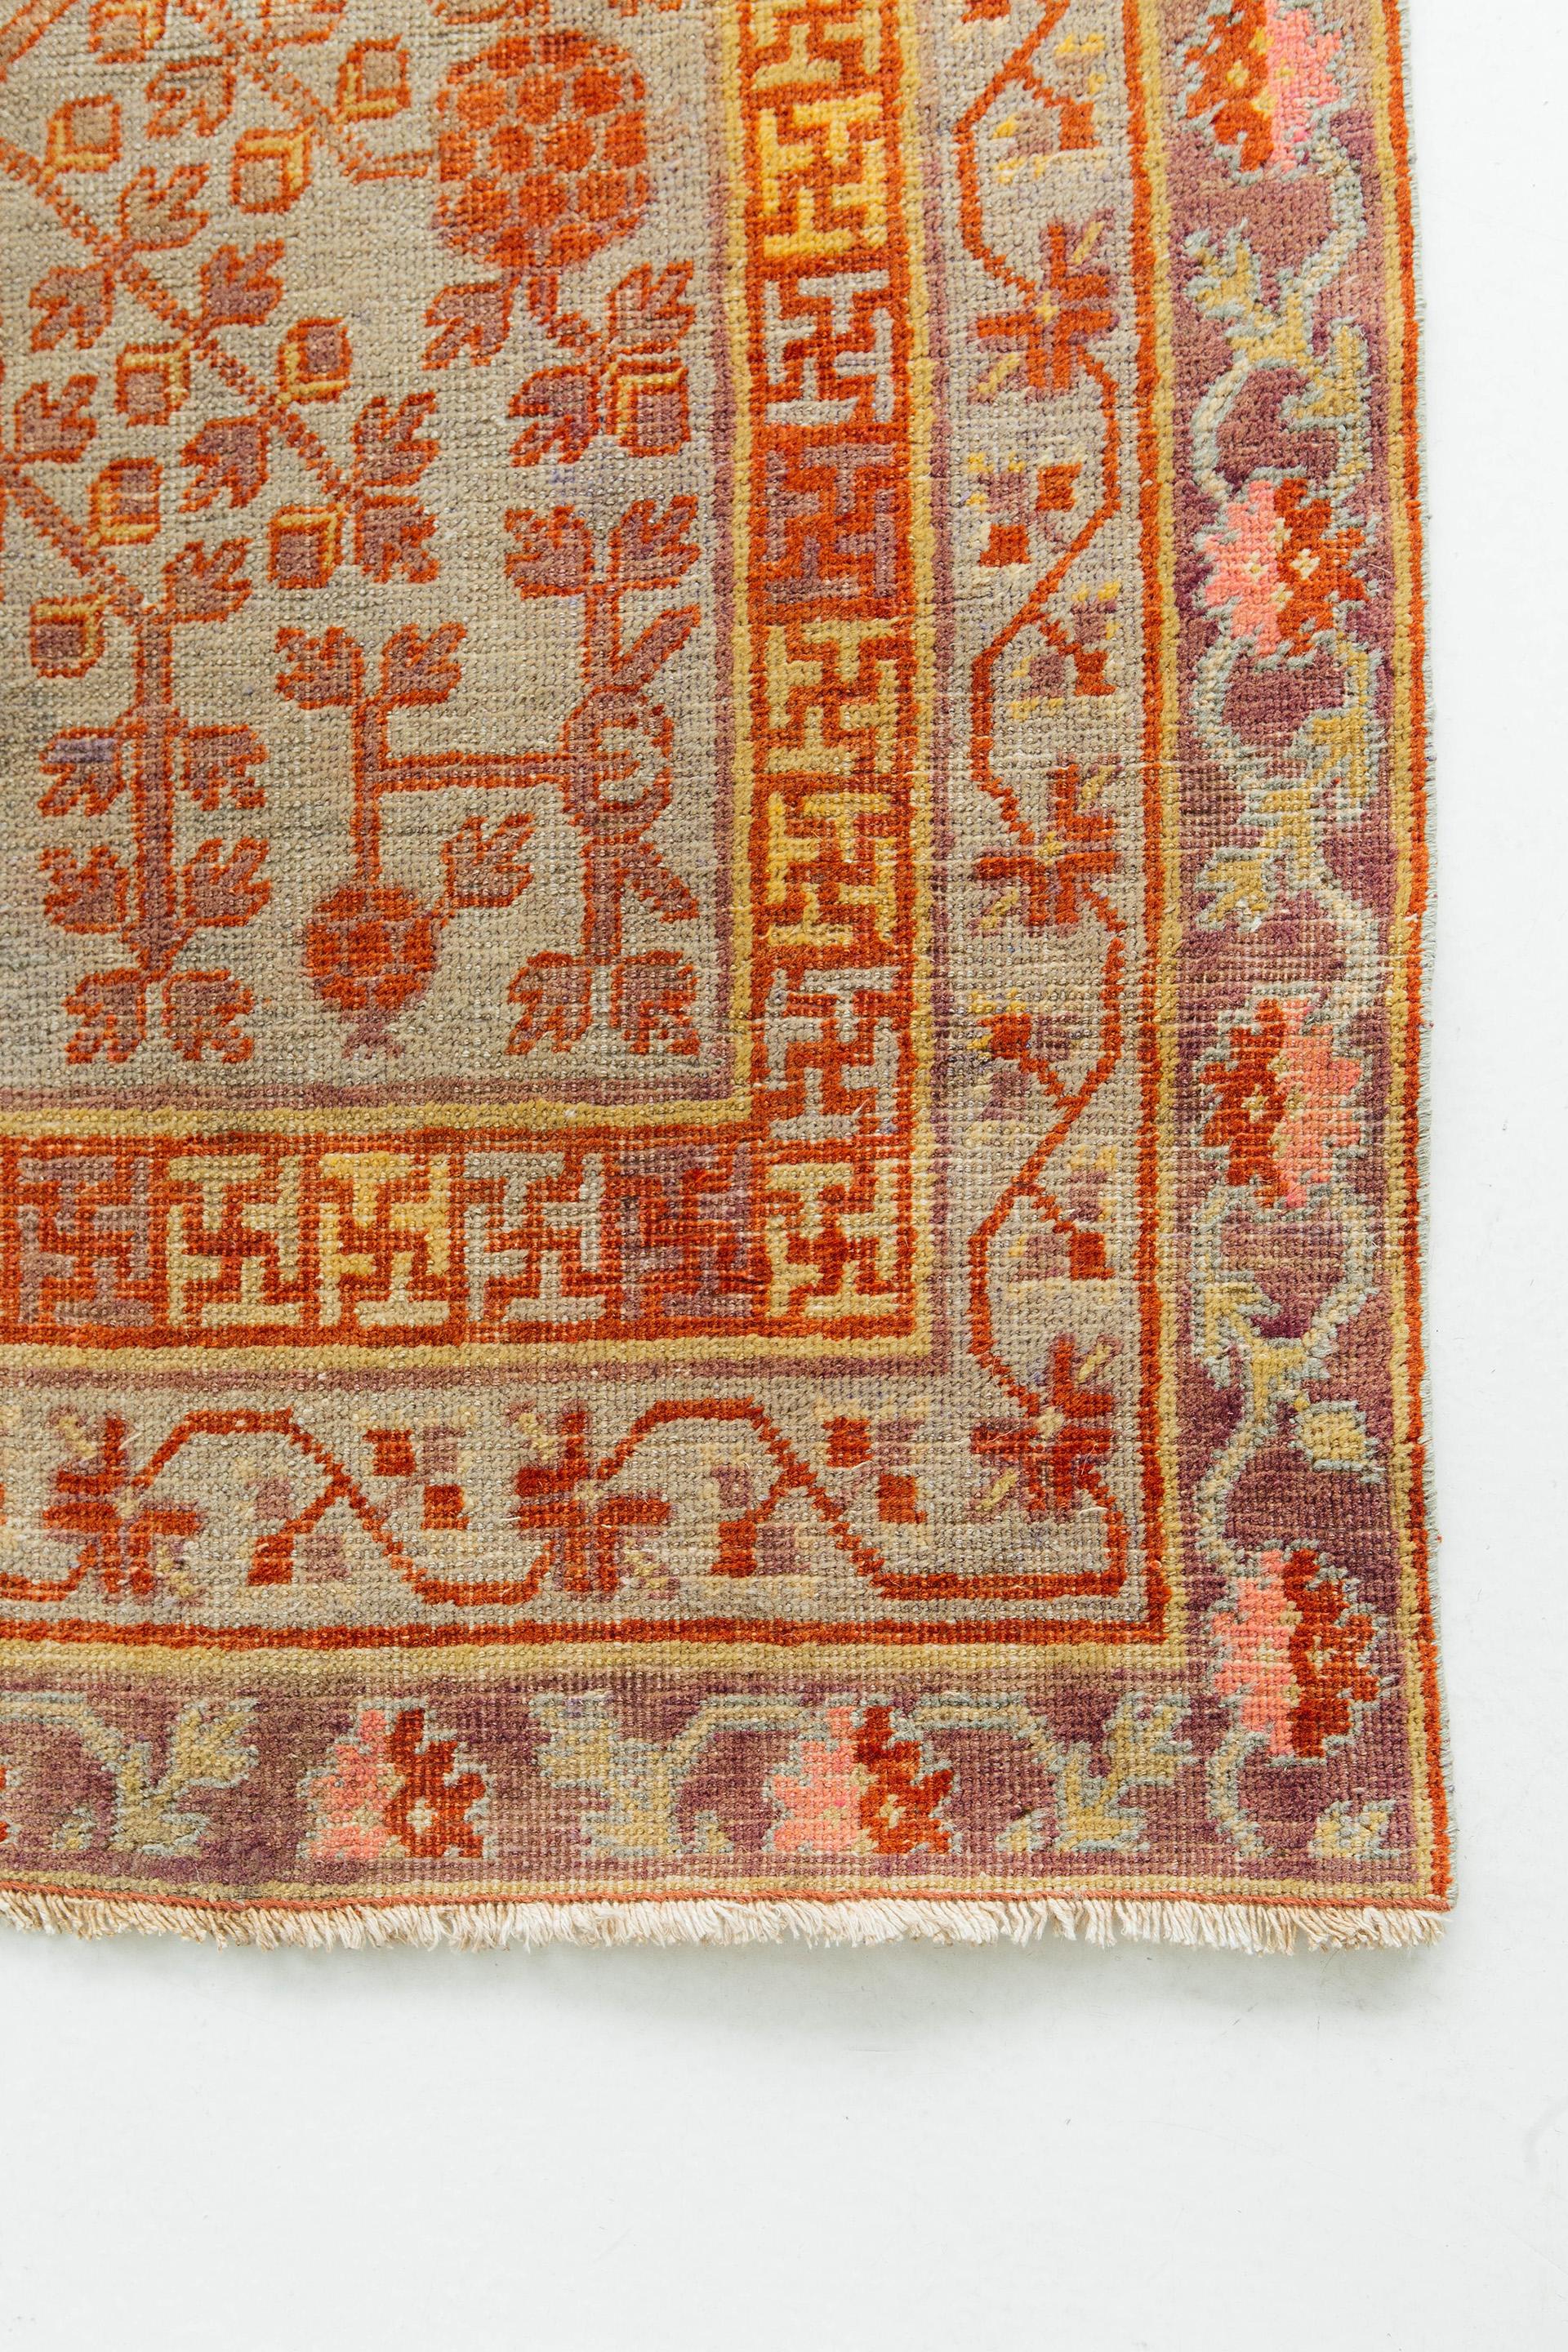 This fine antique Khotan features an elaborate all-over branching pomegranate tree motif on a gray green ground. Secondary colors include soft red, gray, pink and gold. Tiered borders include inner fret and two meanders. Khotan rugs originate from